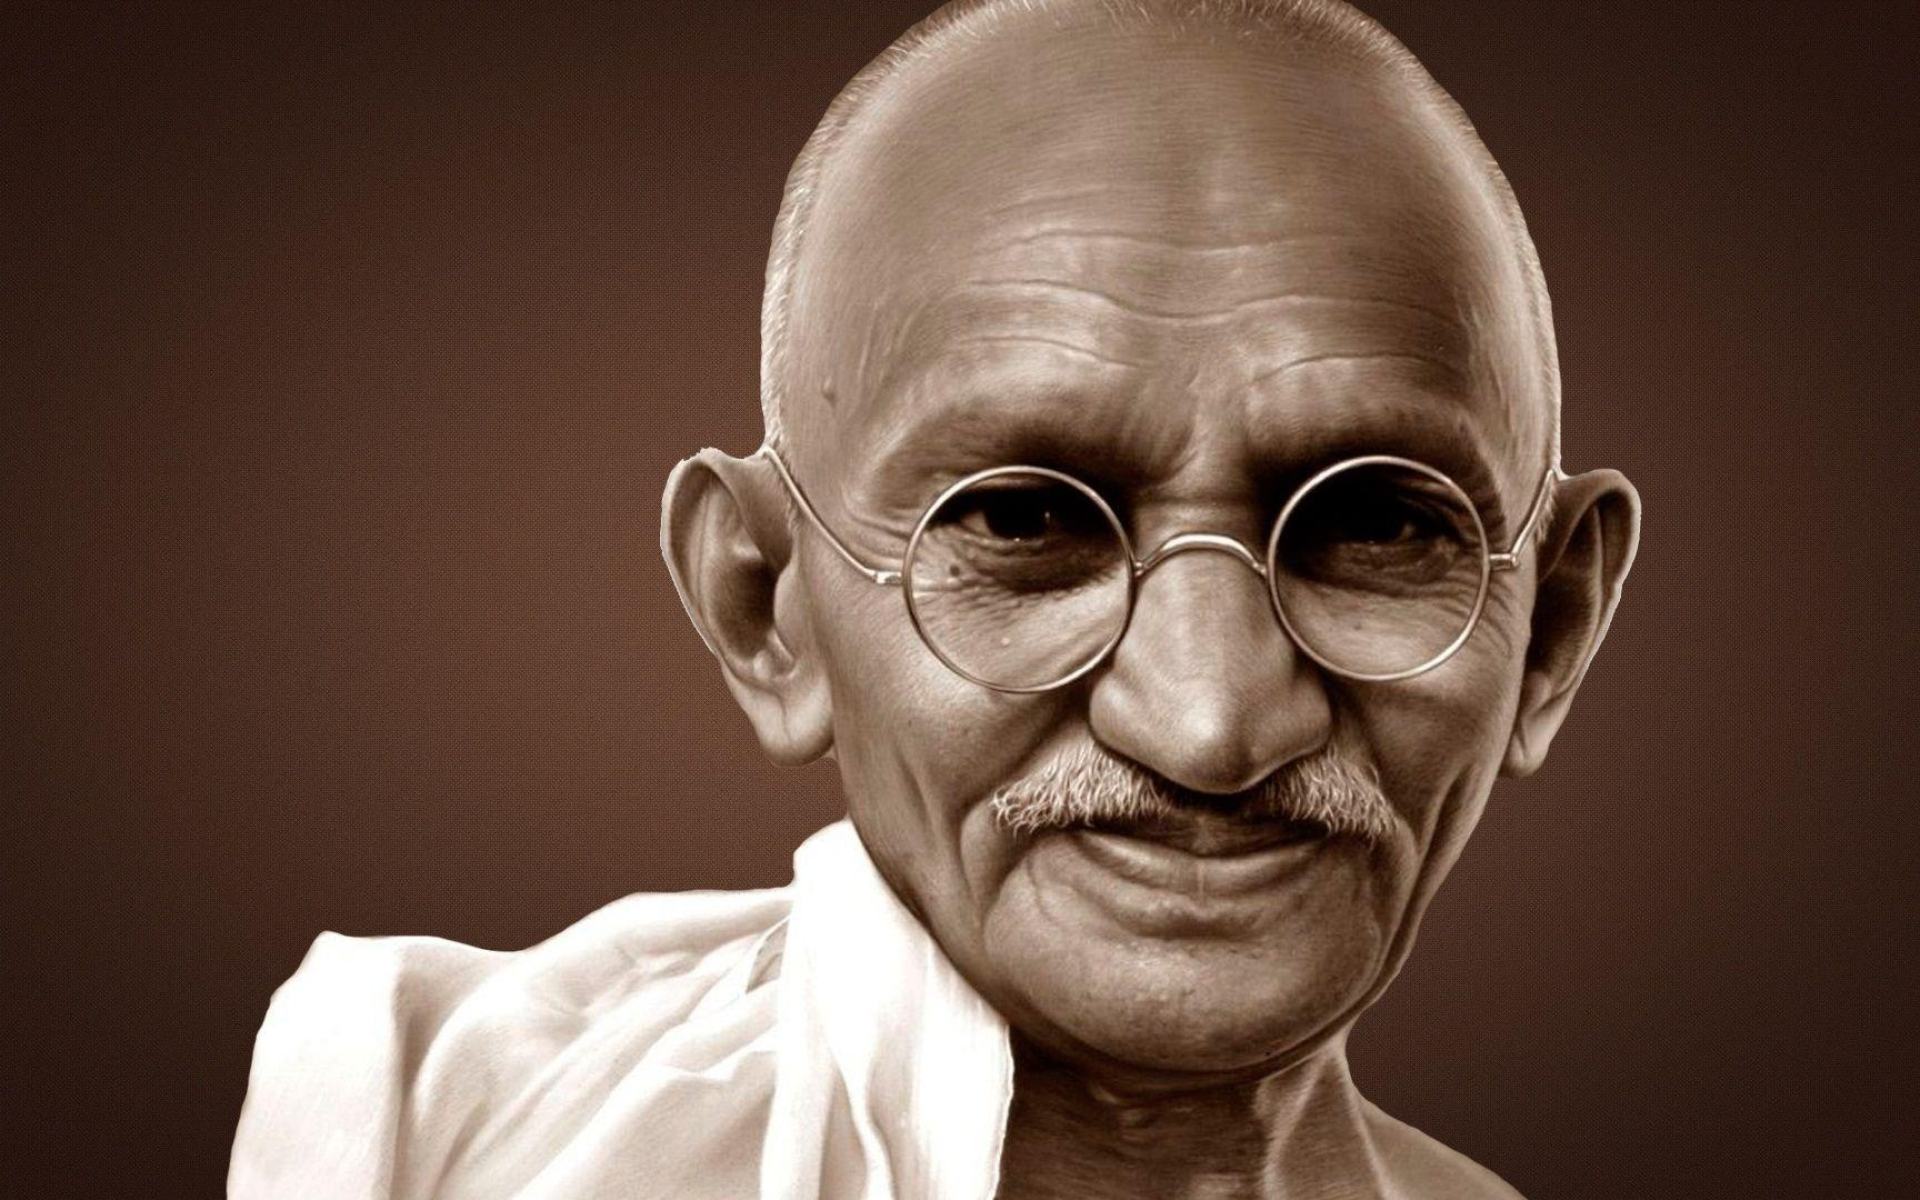 Mahatma Gandhi wallpapers, Symbol of peace, Indian freedom fighter, Legacy of non-violence, 1920x1200 HD Desktop